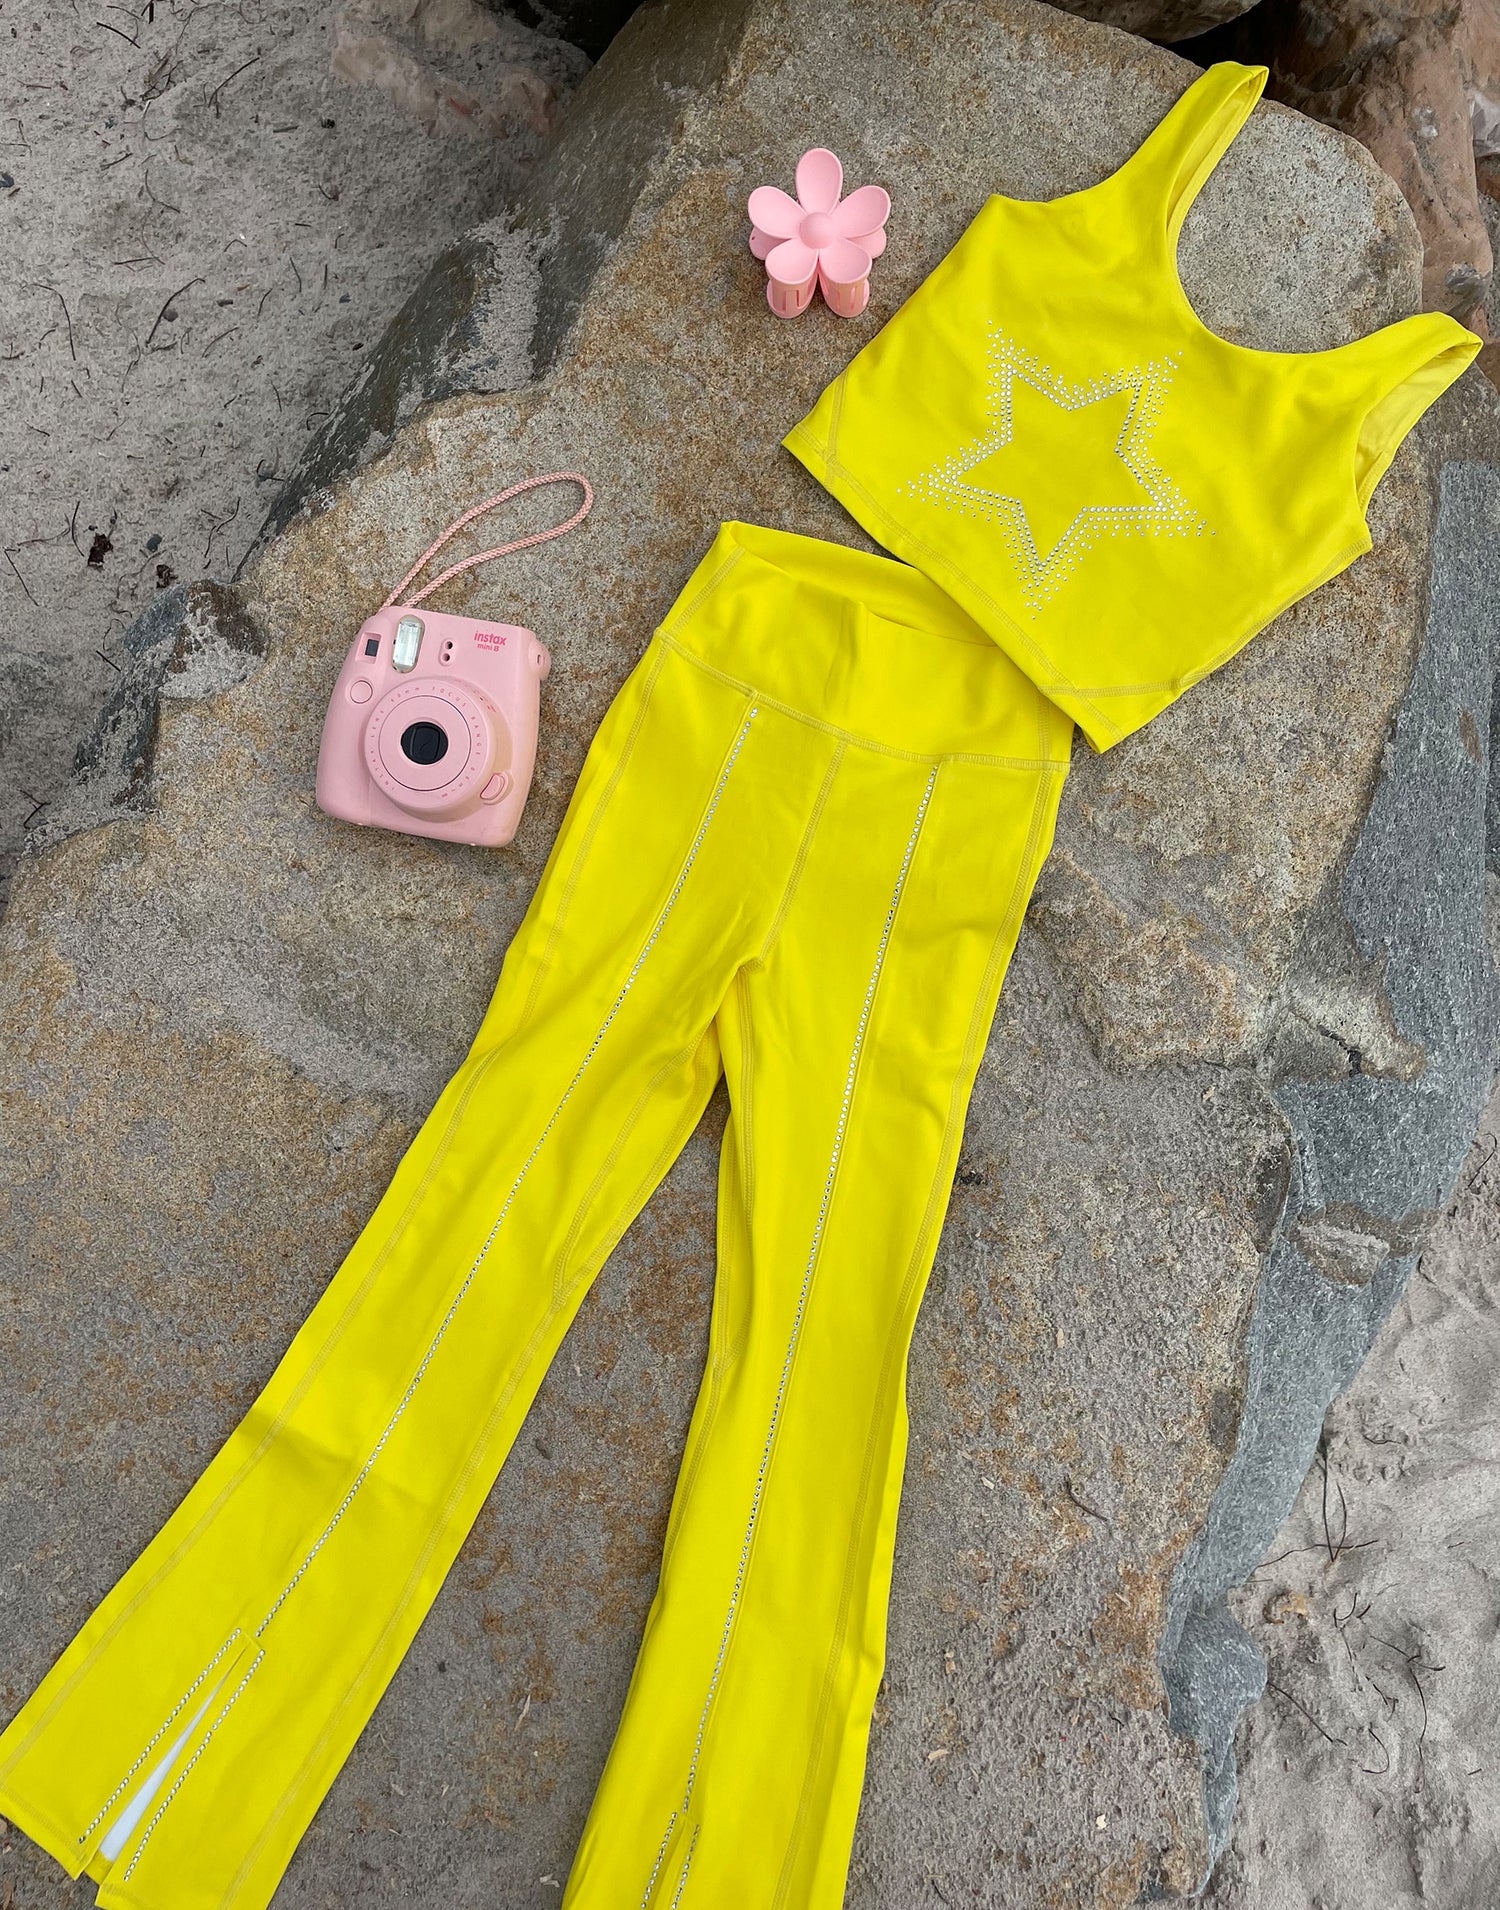 Brooklynn Flare Active Pant in Yellow with Front Spilt & Rhinestone Details - Product View